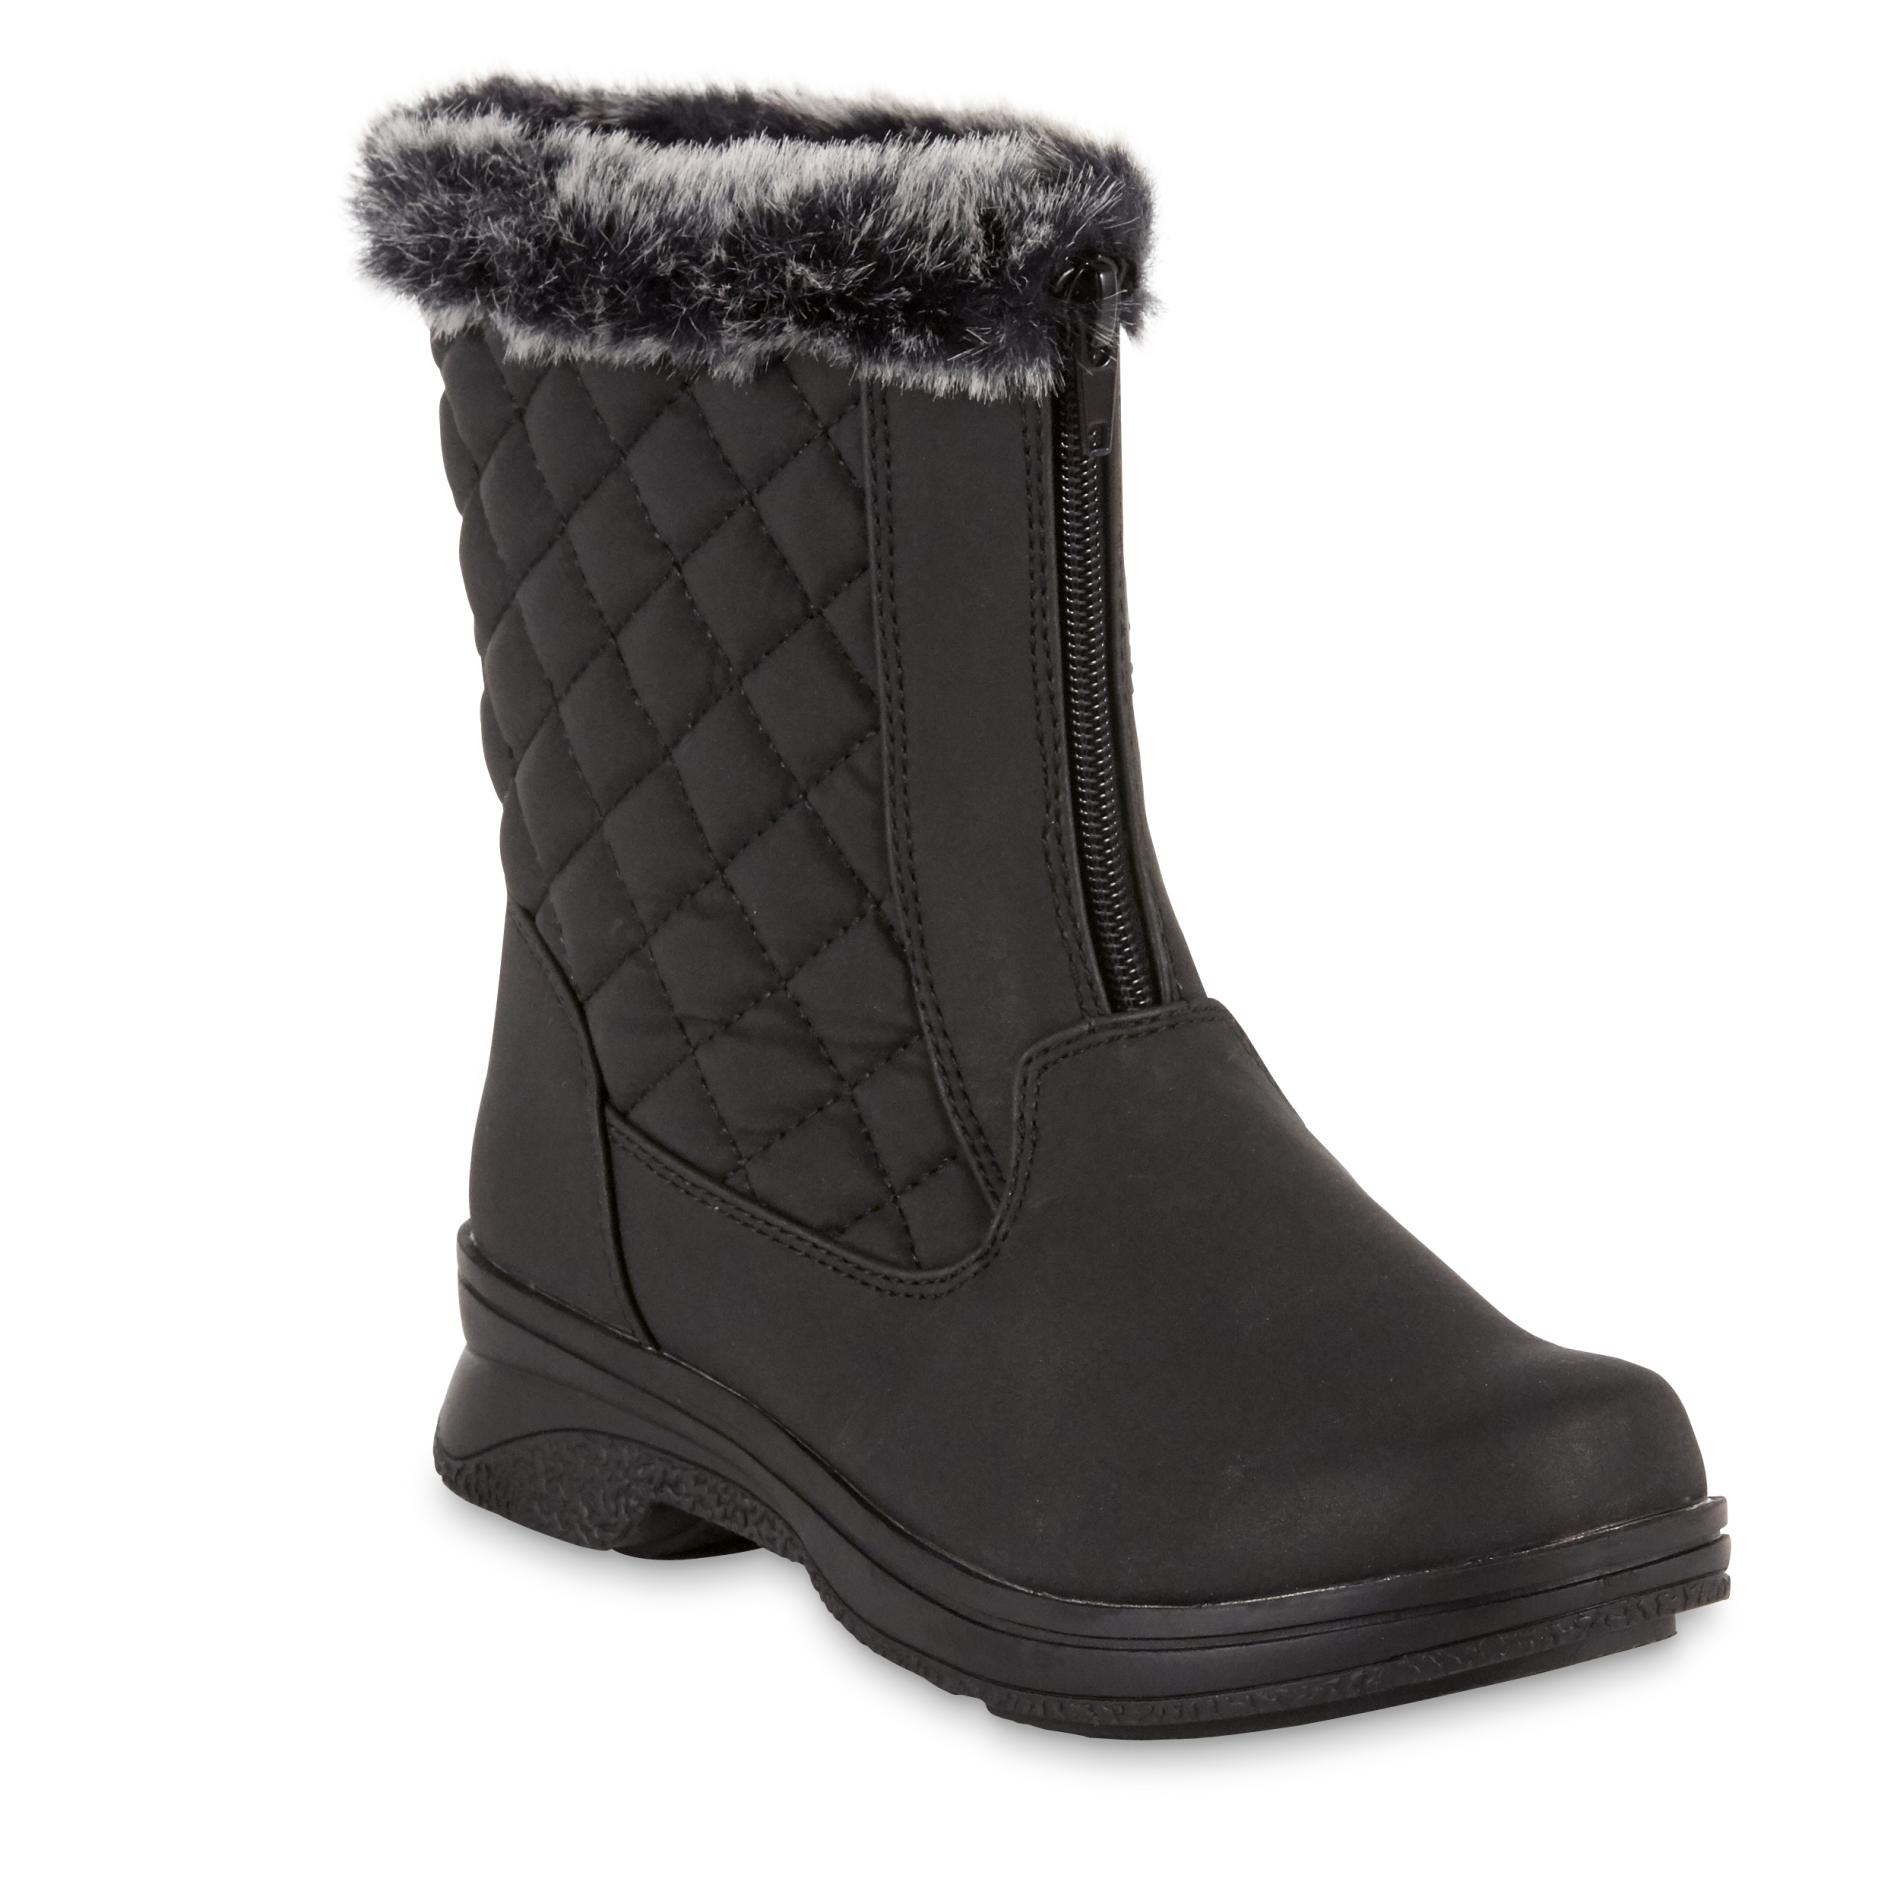 kmart womens boots clearance